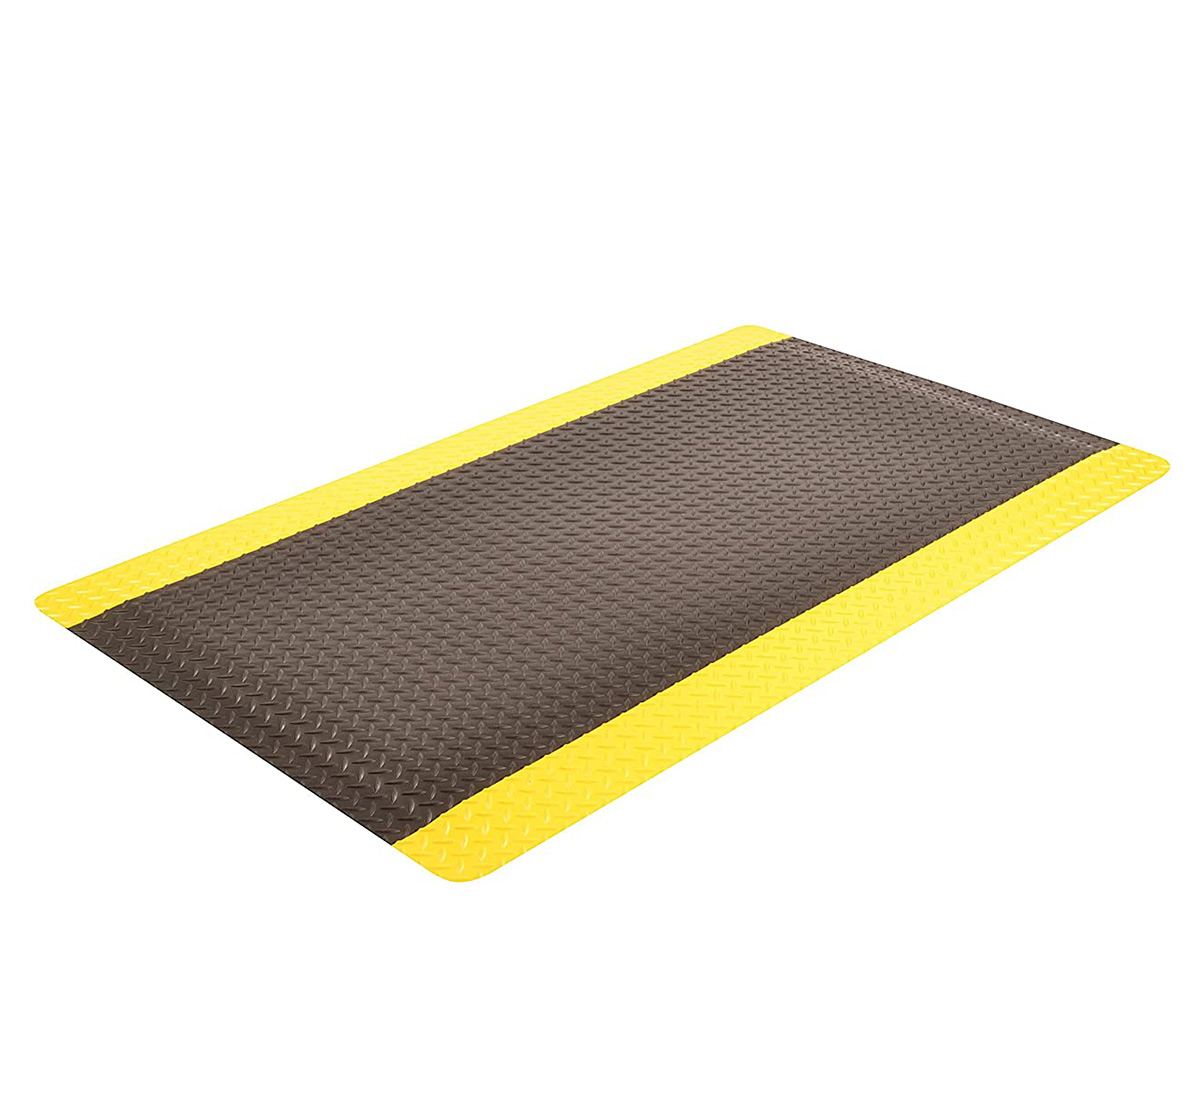 Rubber Heavy Duty Anti Fatigue Mat Safety Grip Non Slip Workplace